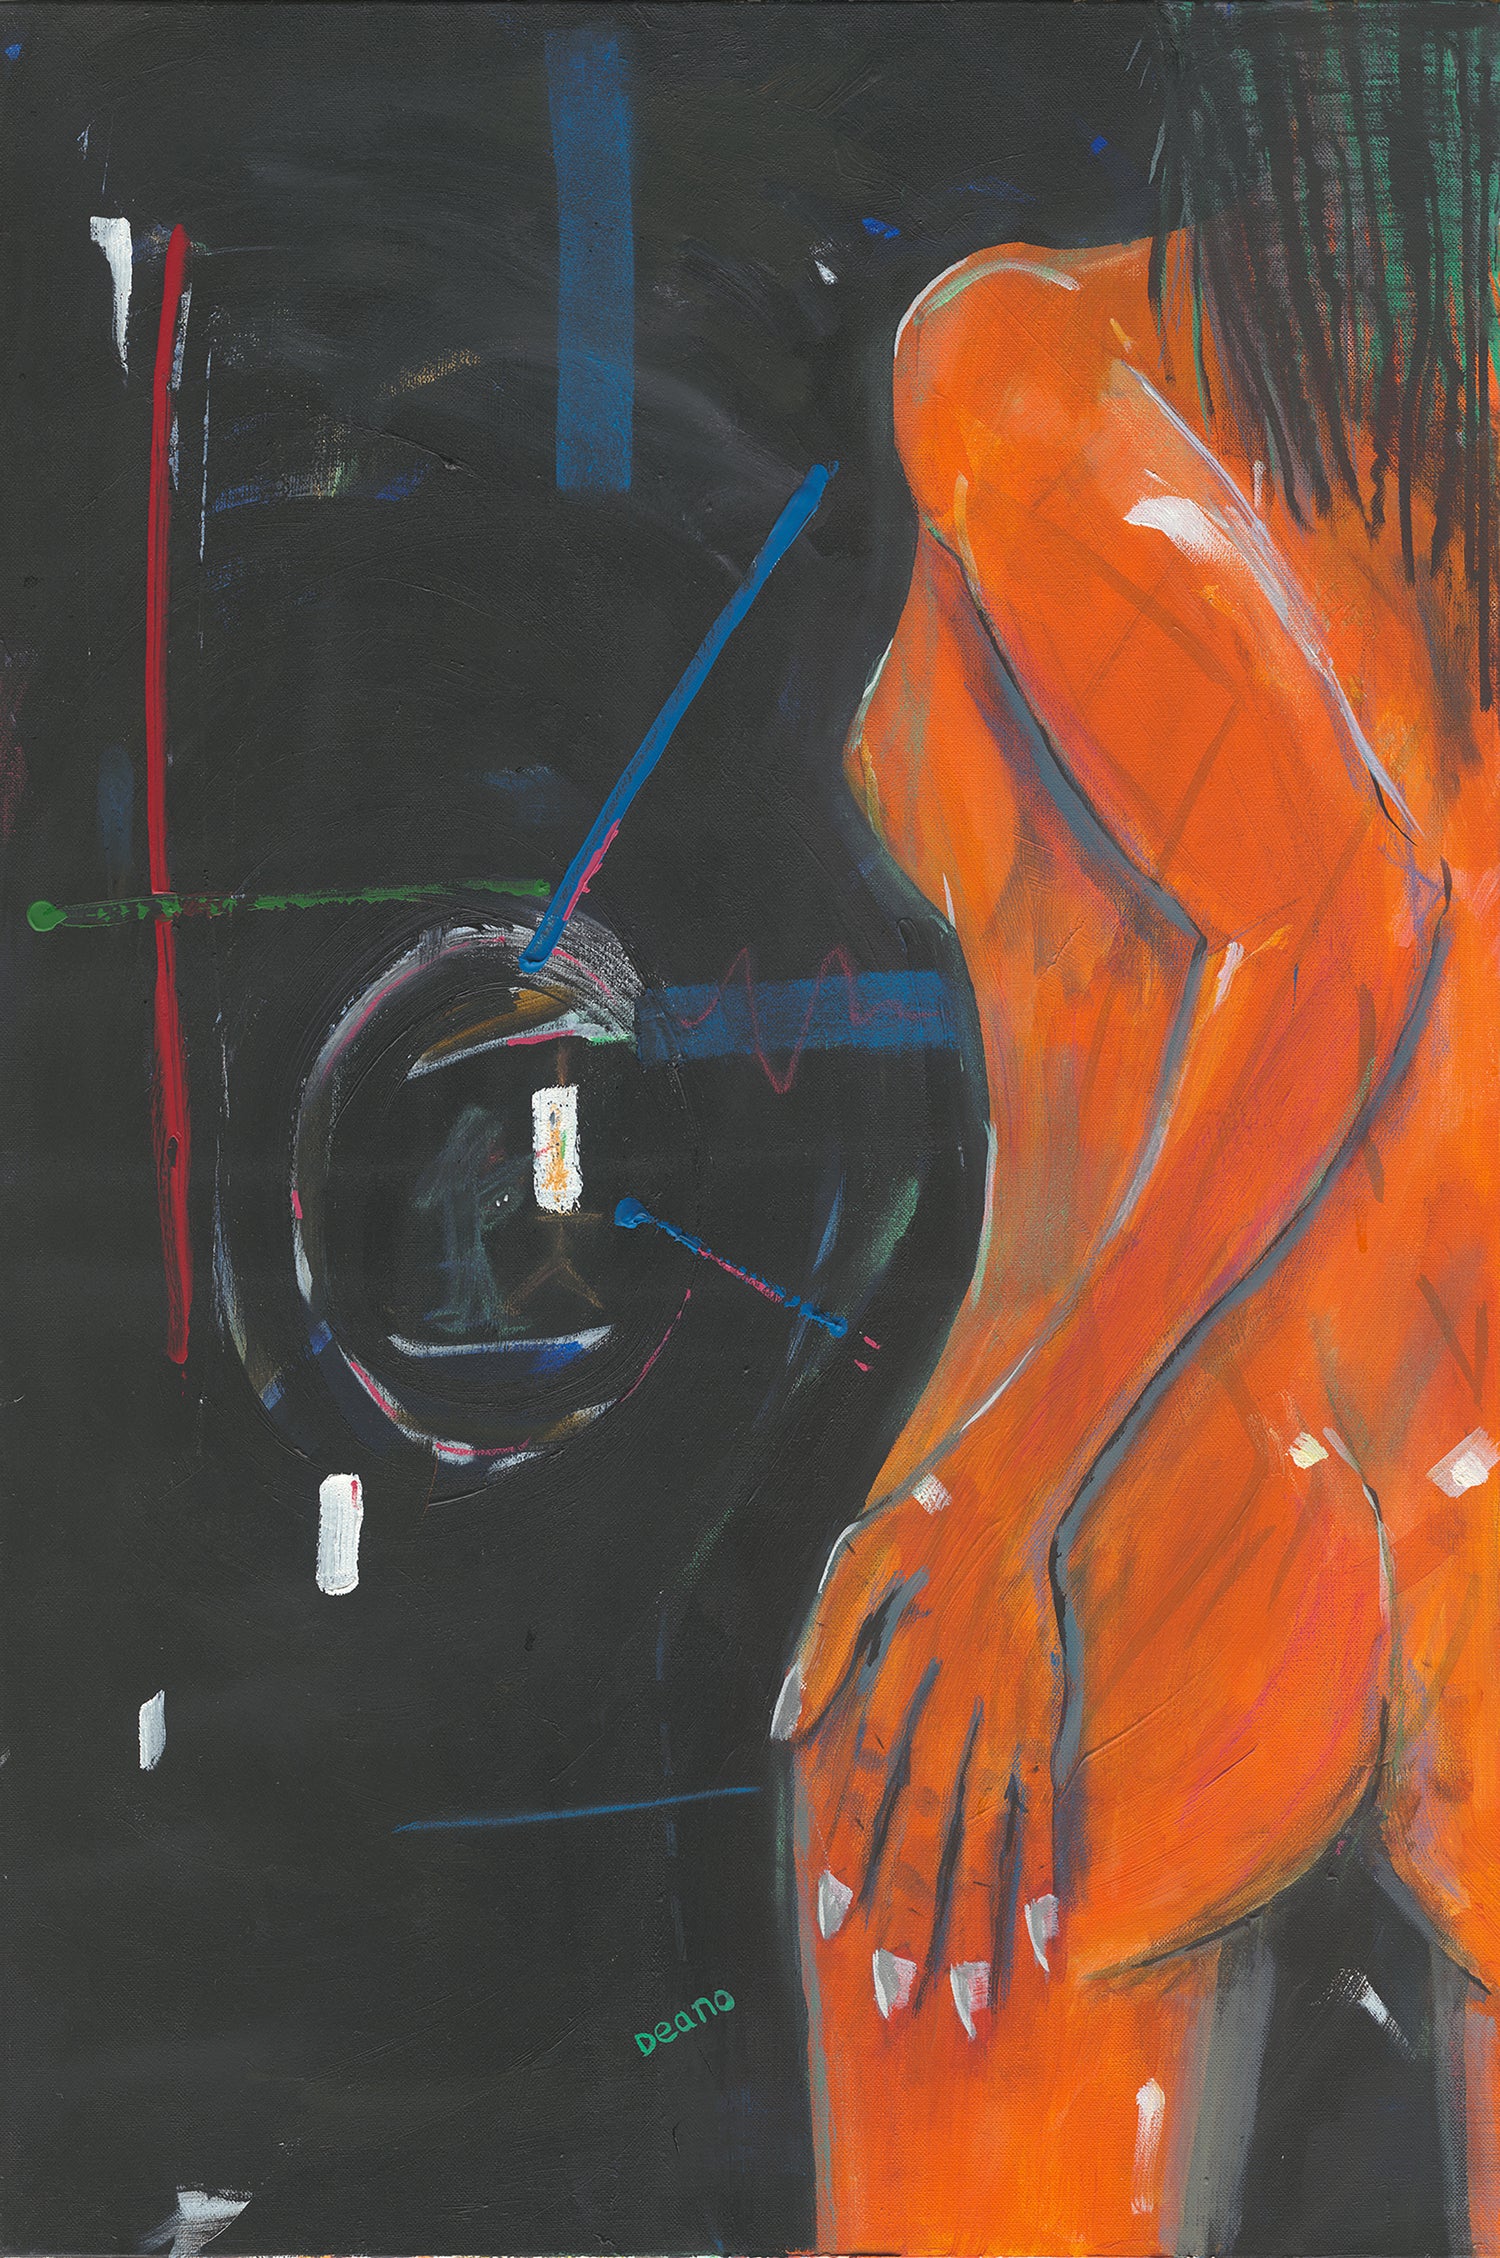 A captivating acrylic and pastel artwork on canvas, portraying a woman with a radiant orange hue. Her stance, with her back to the viewer, exudes elegance and poise. Crafted with finesse by Deano Hewitts between 2018-2021.